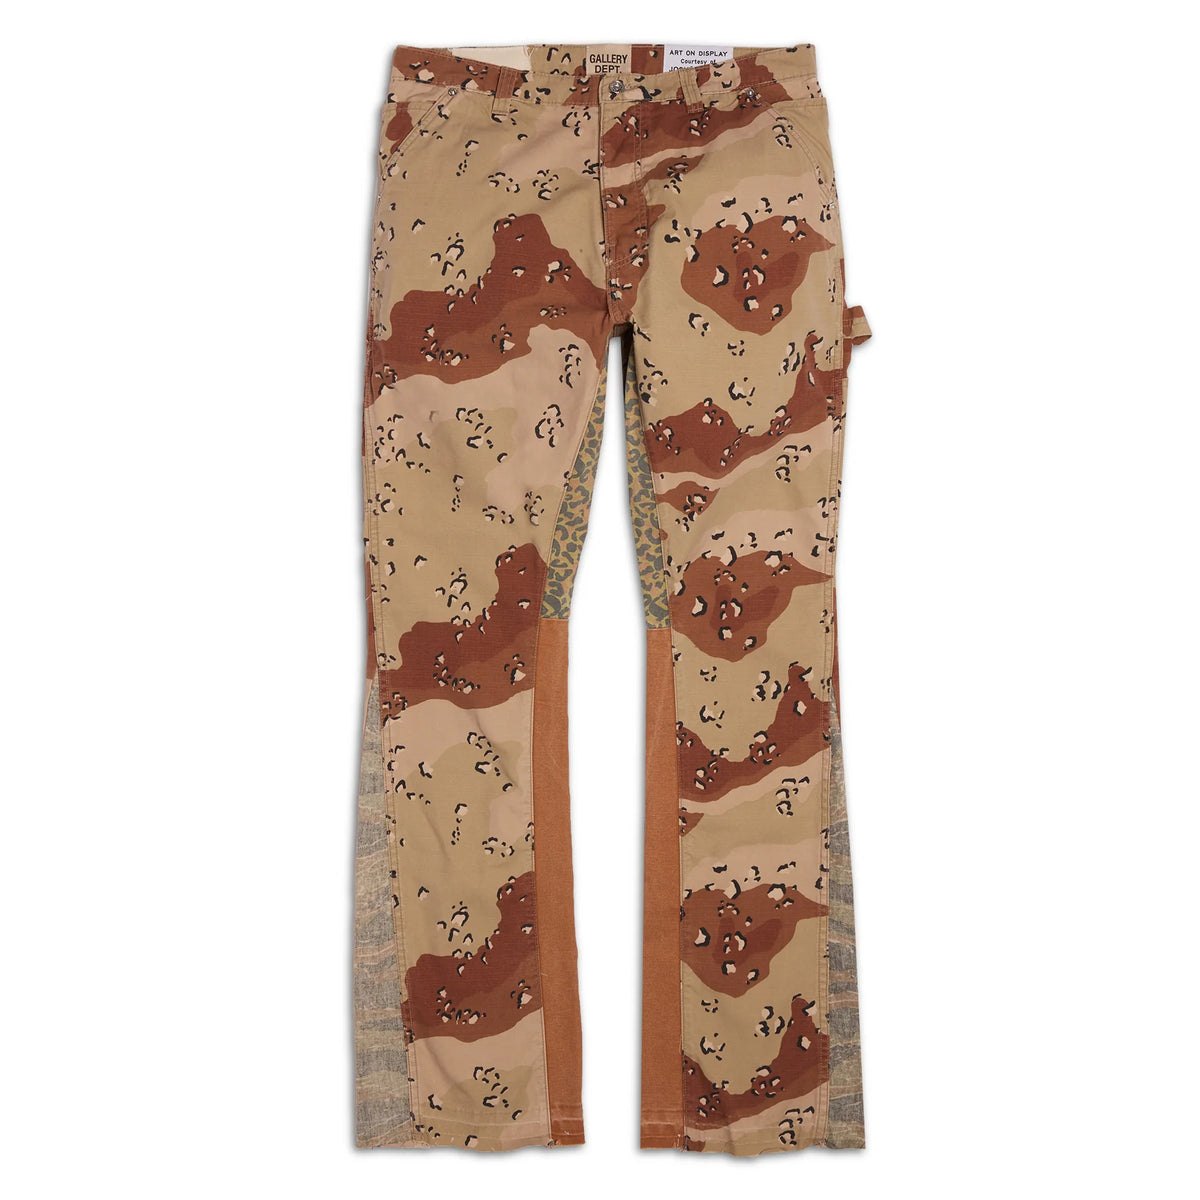 GALLERY DEPT. Choc Chip La Flare Trousers